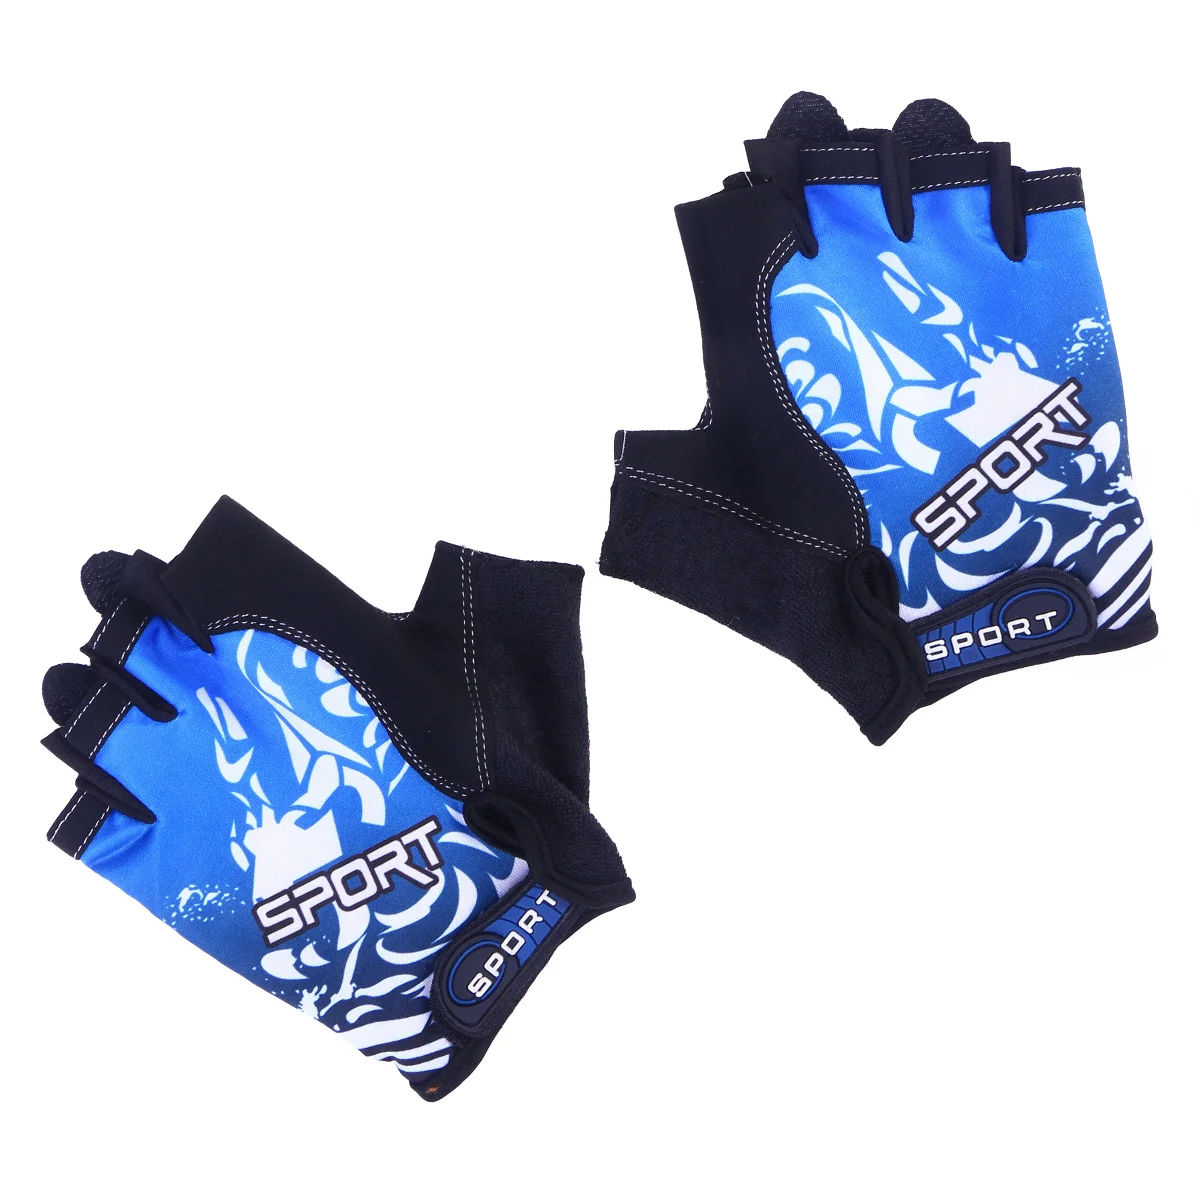 1 pair scooter gloves boys girls cycling gloves non slip hand muffs warm mittens for camping fishing outdoor sports dropshipping 1 Pair Outdoor Sports Half Finger Gloves Non-Slip Breathable Workout Gloves for Cycling Climbing Fishing Riding Size M (Blue)